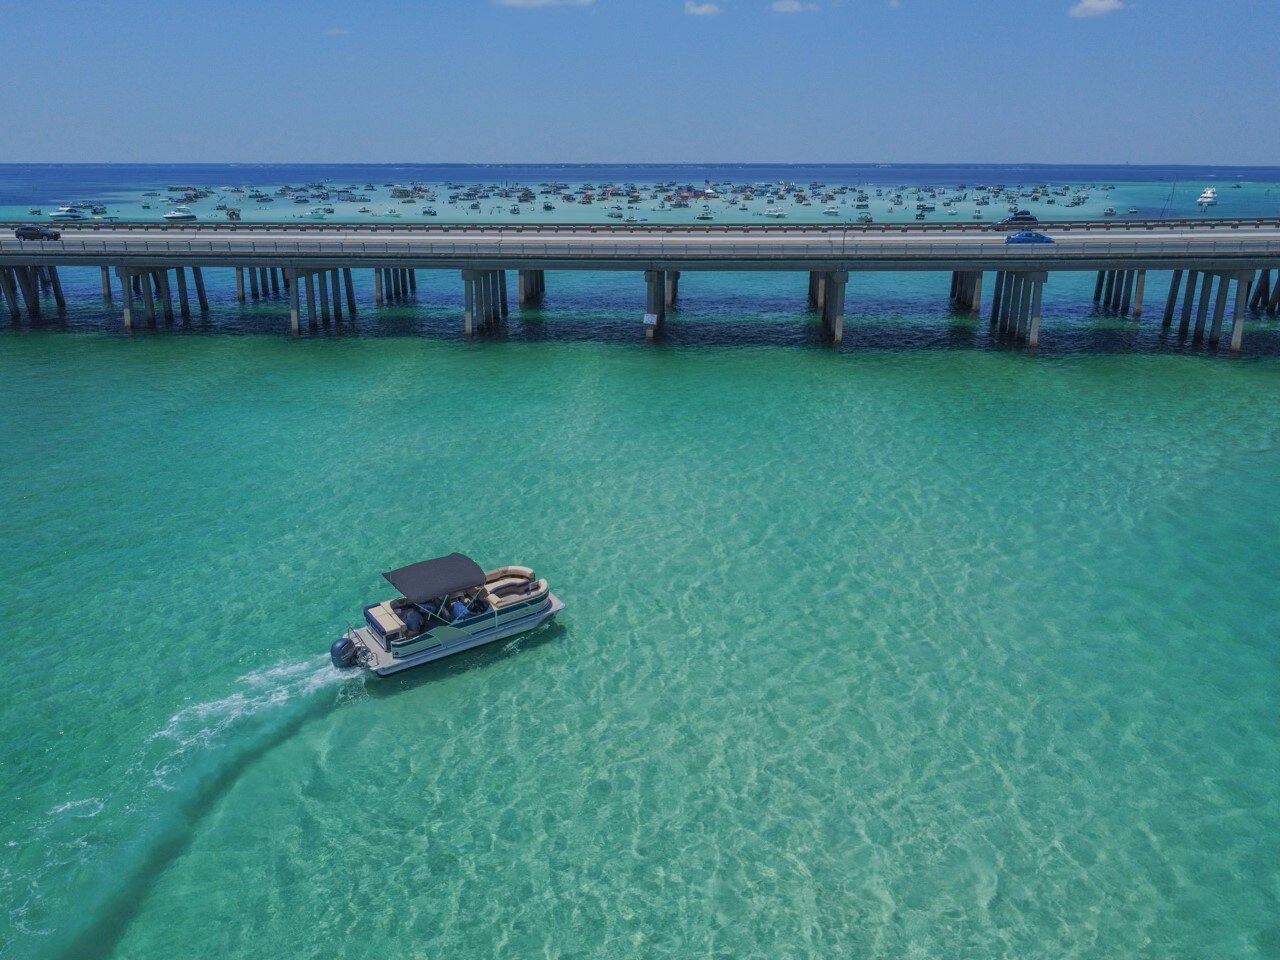 pontoon boat driving through the water off the coast of destin florida